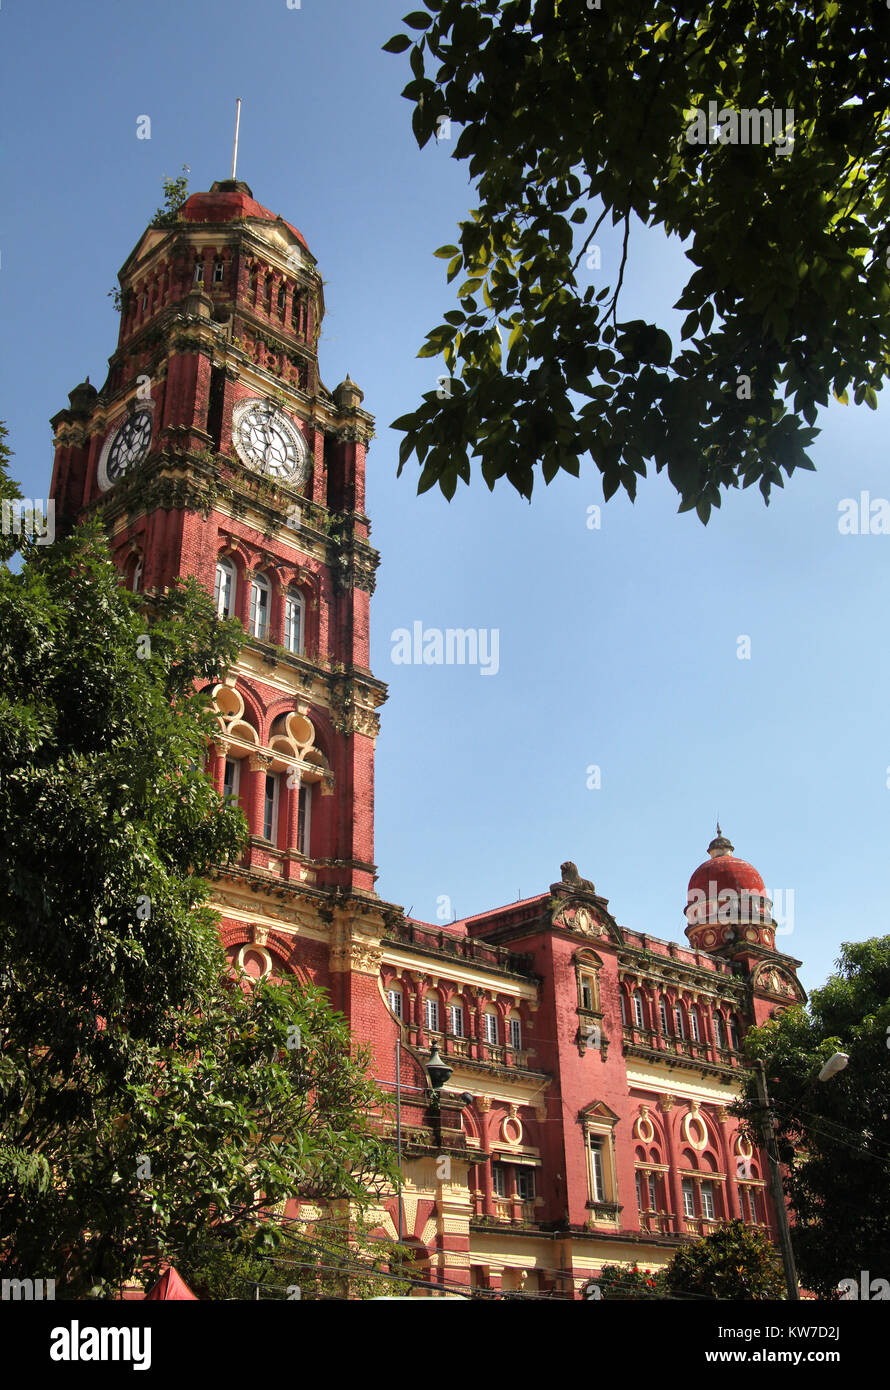 The iconic clock tower of the colonial red brick former High Court Building, Yangon, Myanmar. Stock Photo